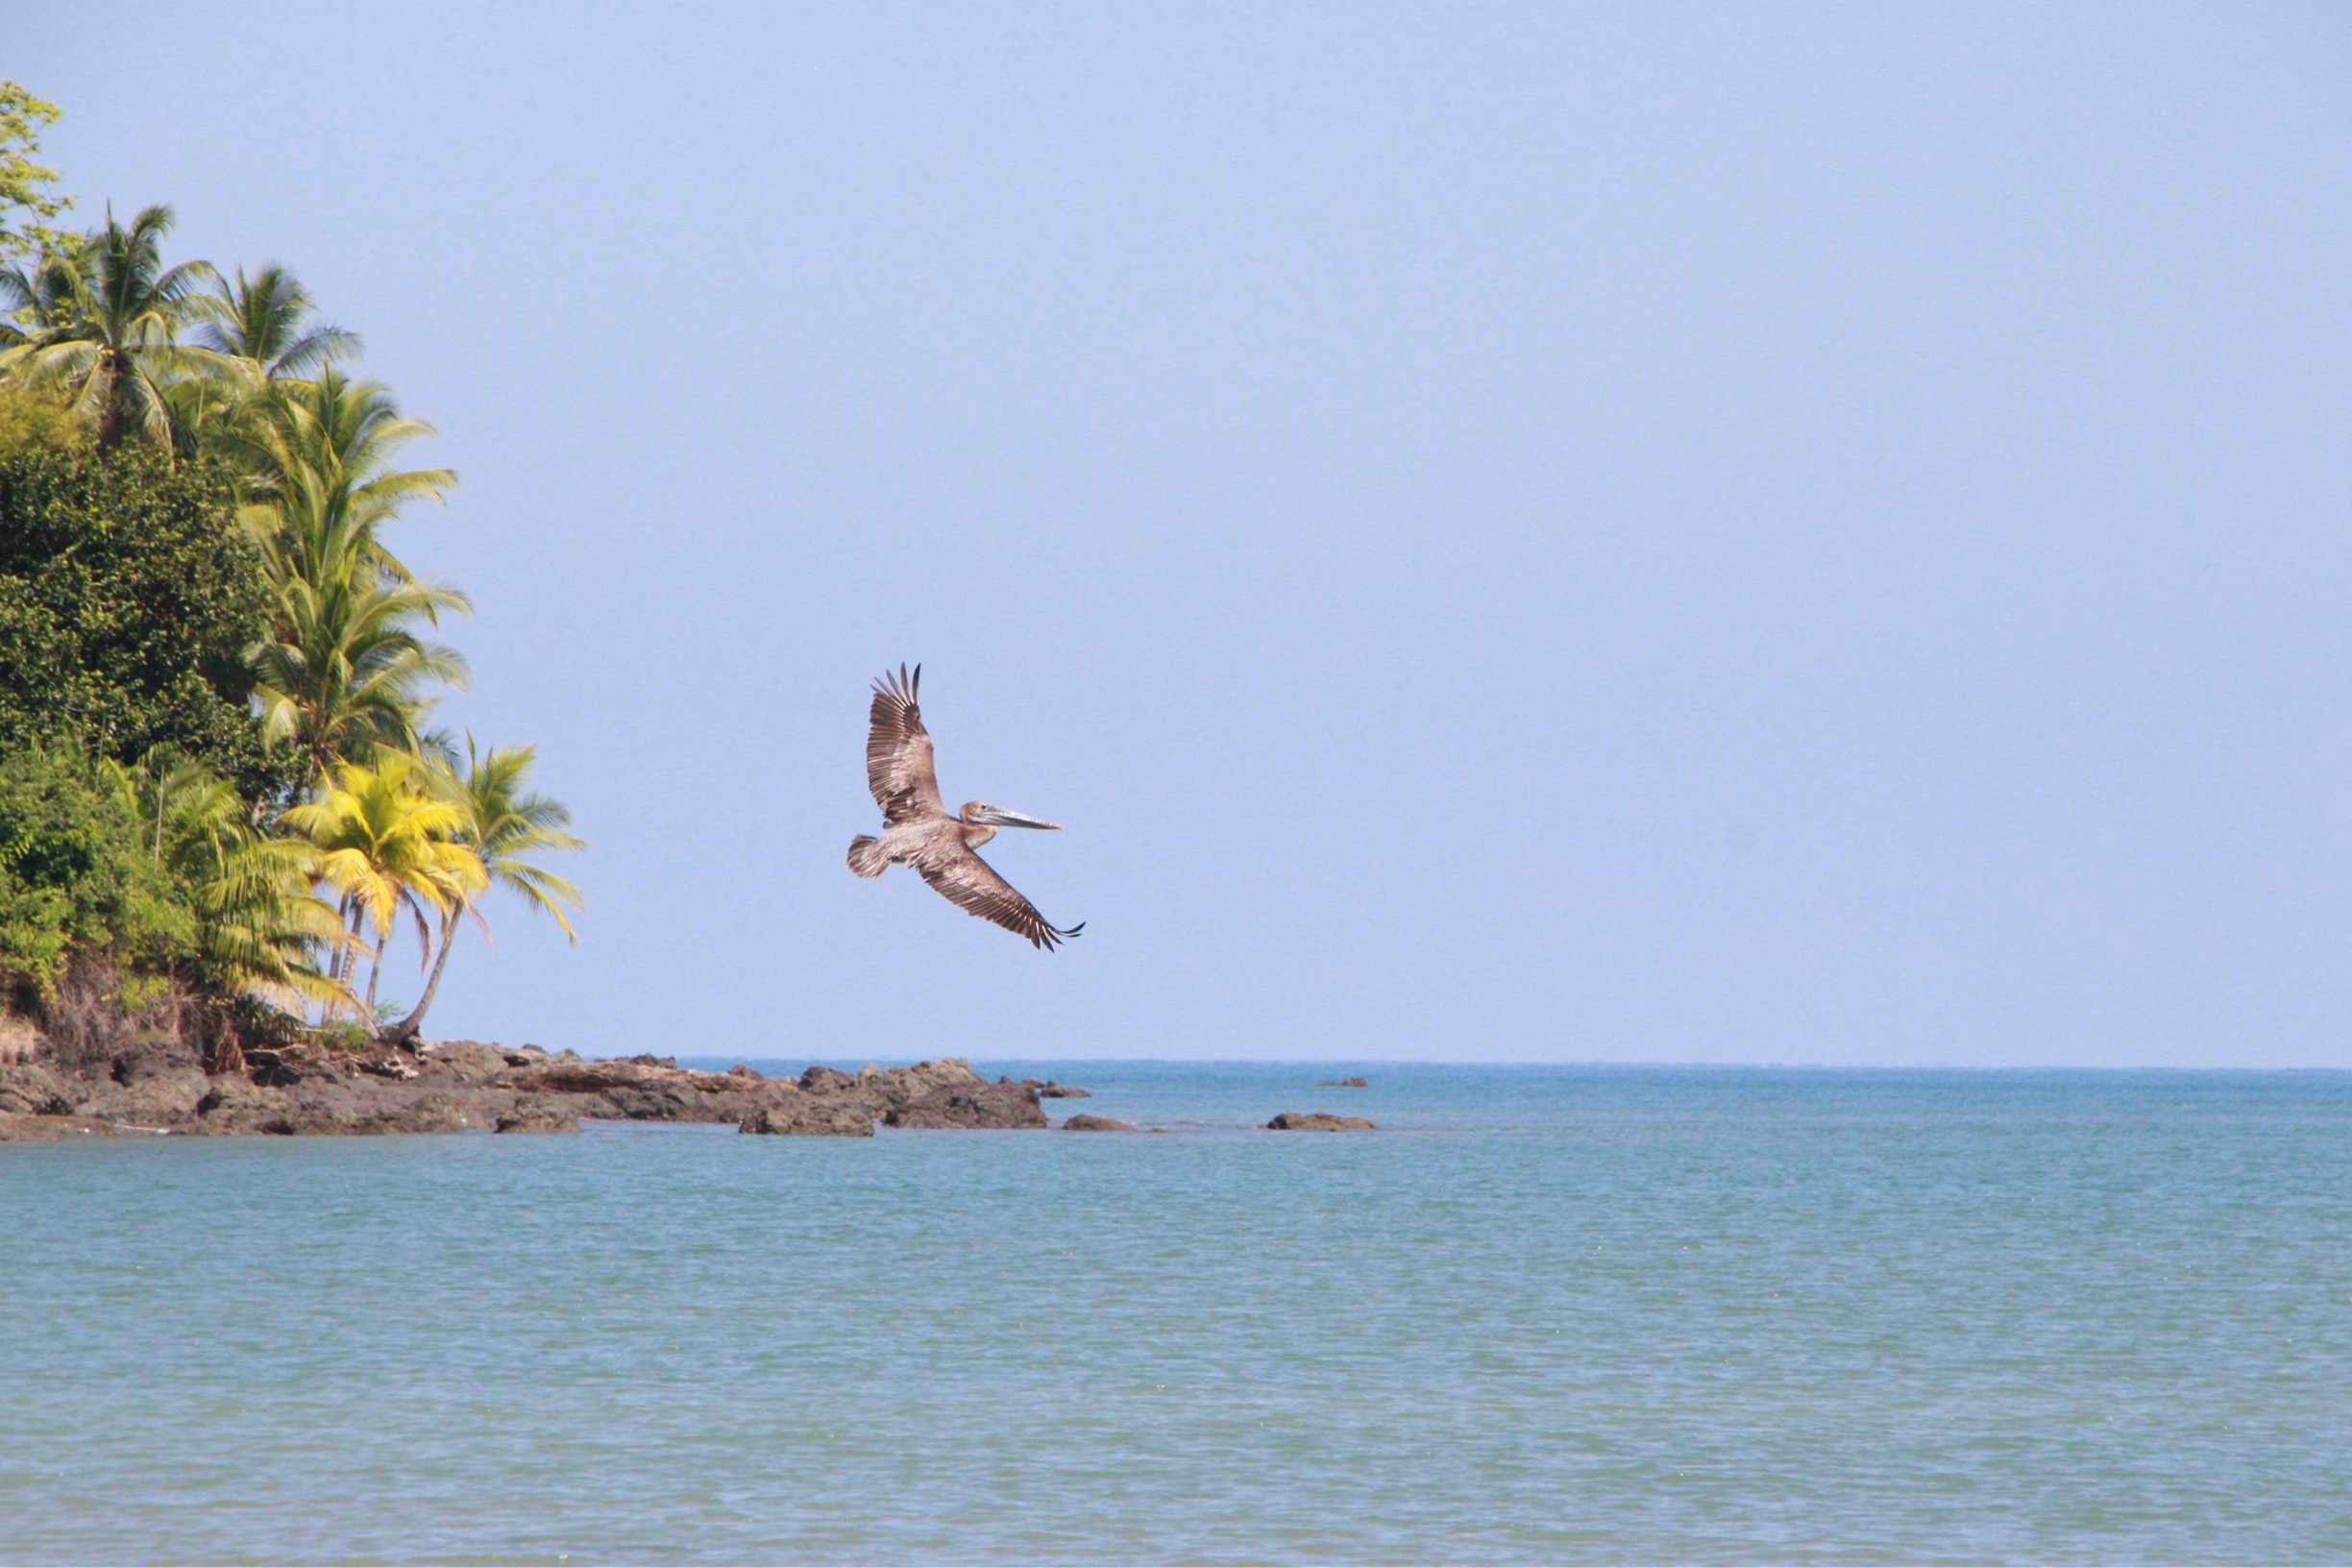 Caught this Pelican flying and diving for fish at the beach in Drake Bay Costa Rica.